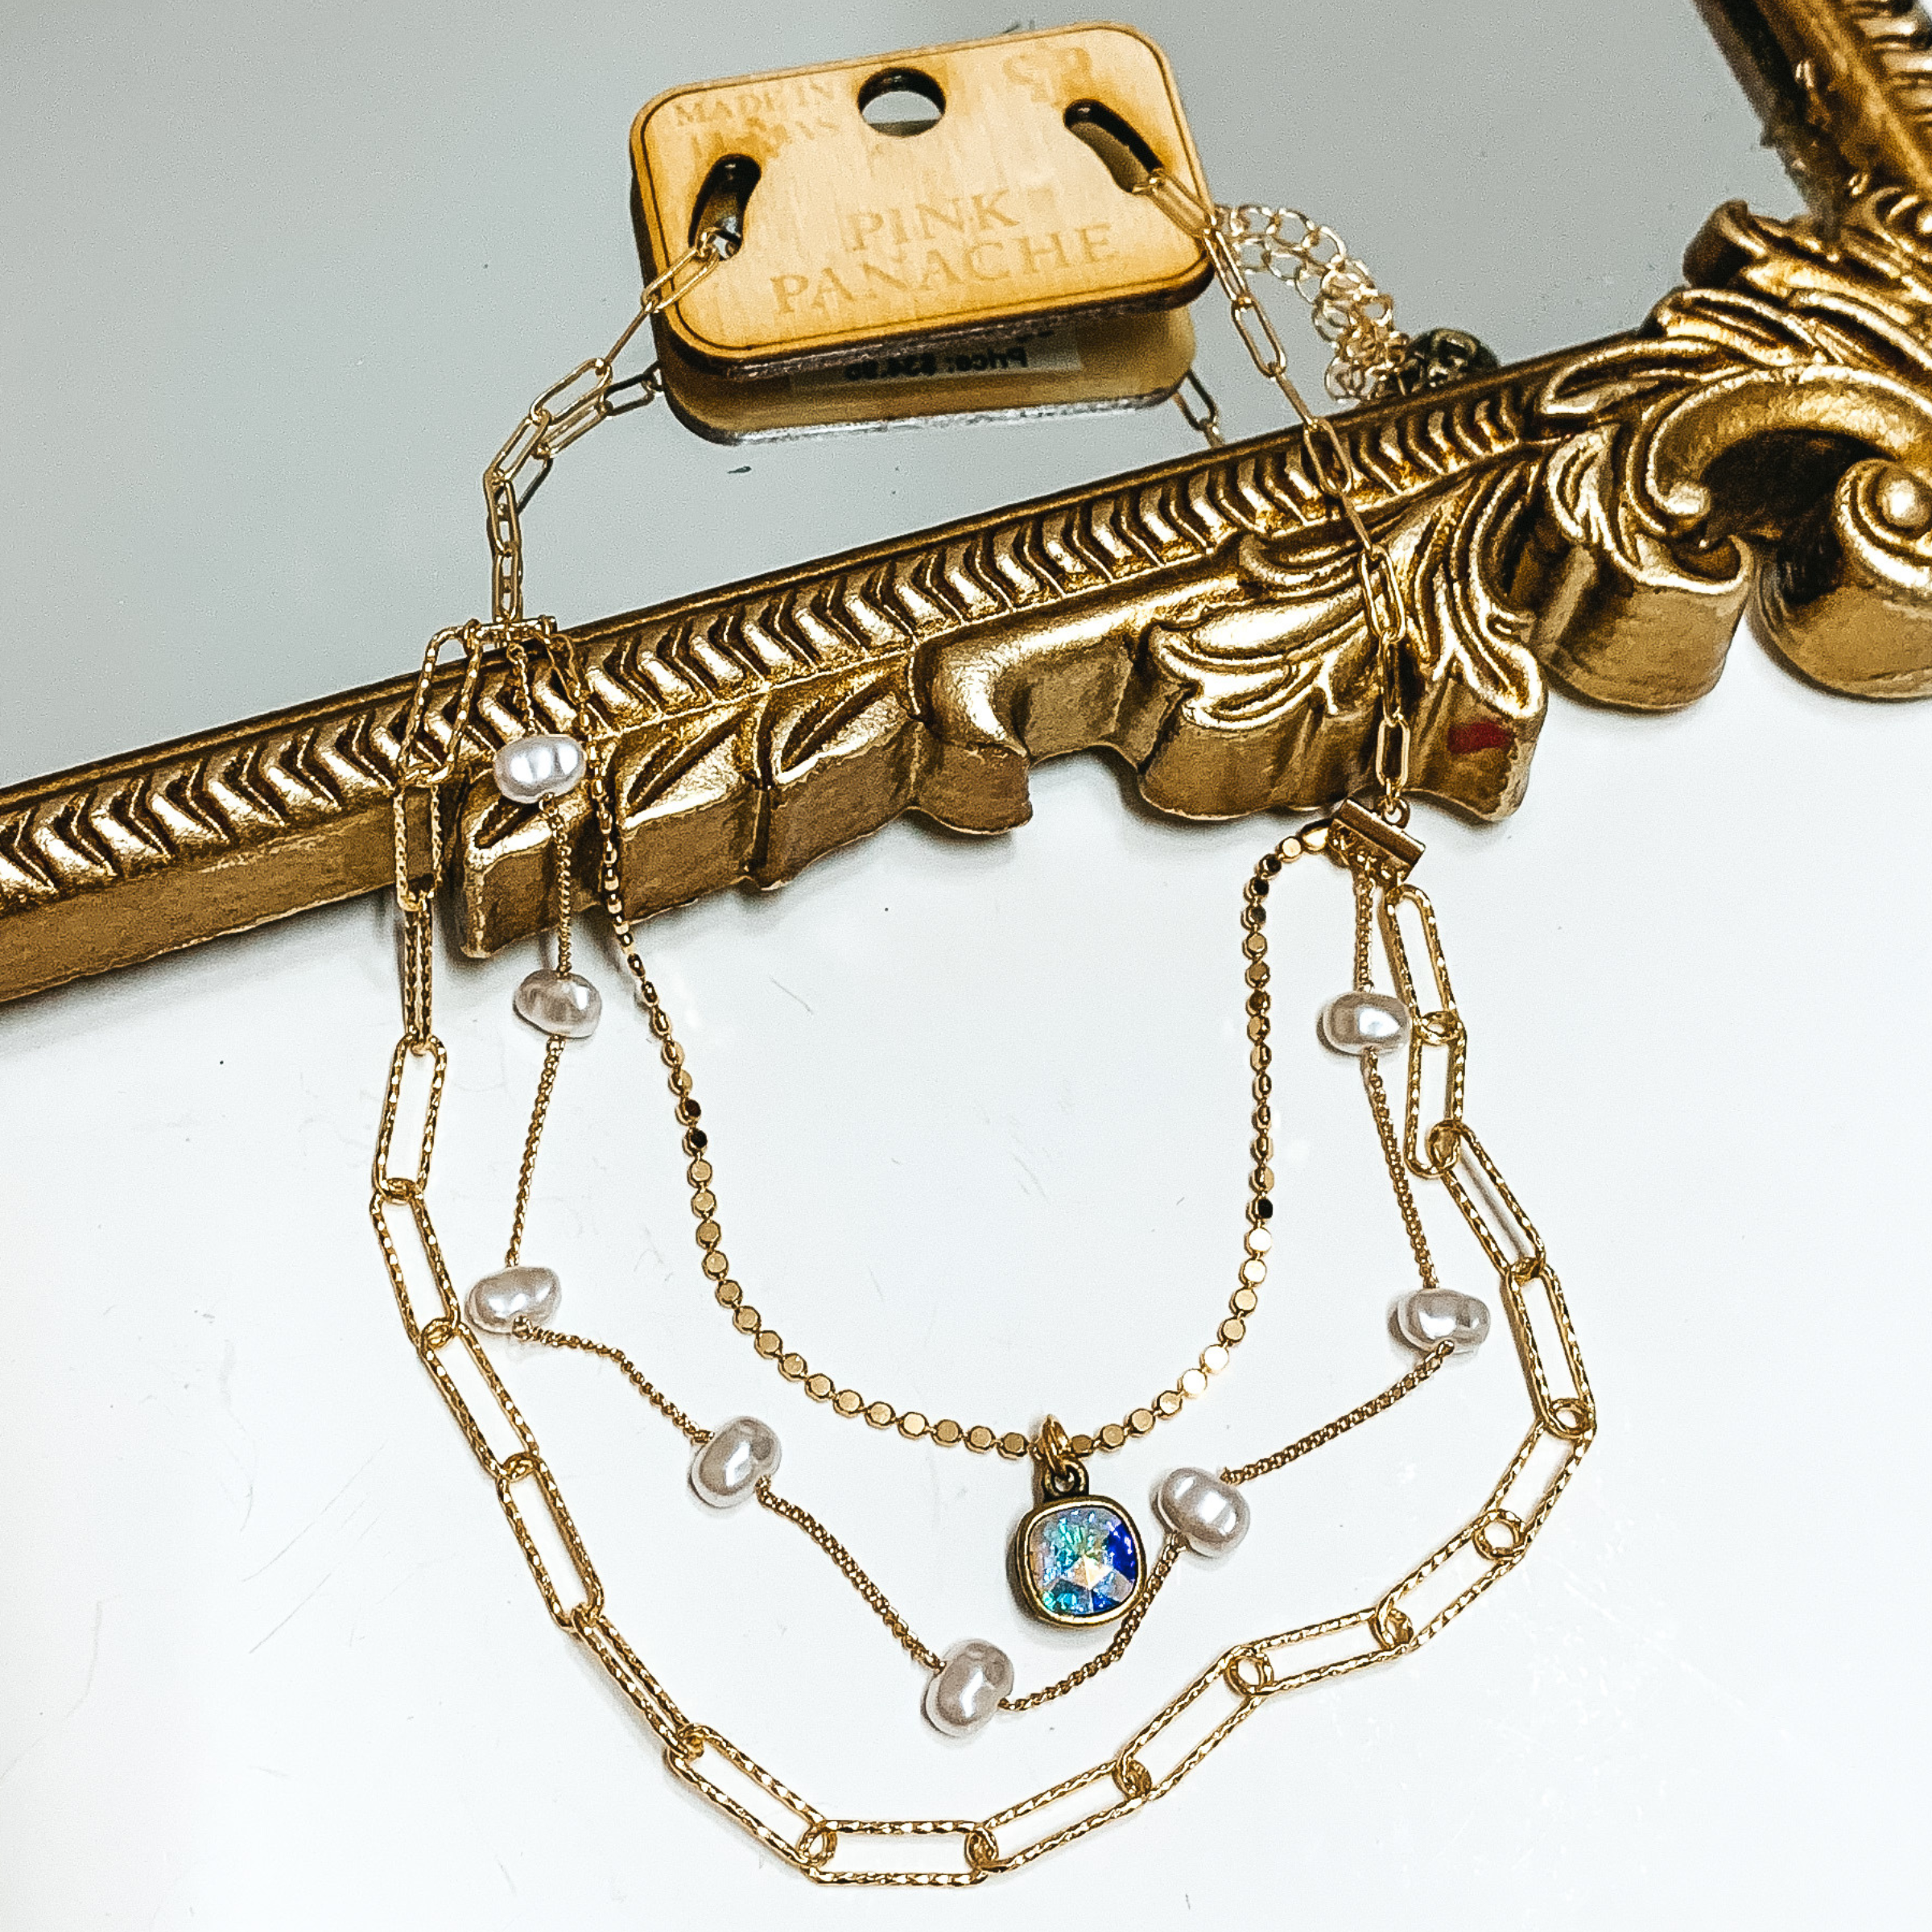 Three strand gold chain necklace. This necklace has white pearl spacers and a hanging ab cushion cut crystal. This necklace is pictured partially laying on a mirror on a white background. 